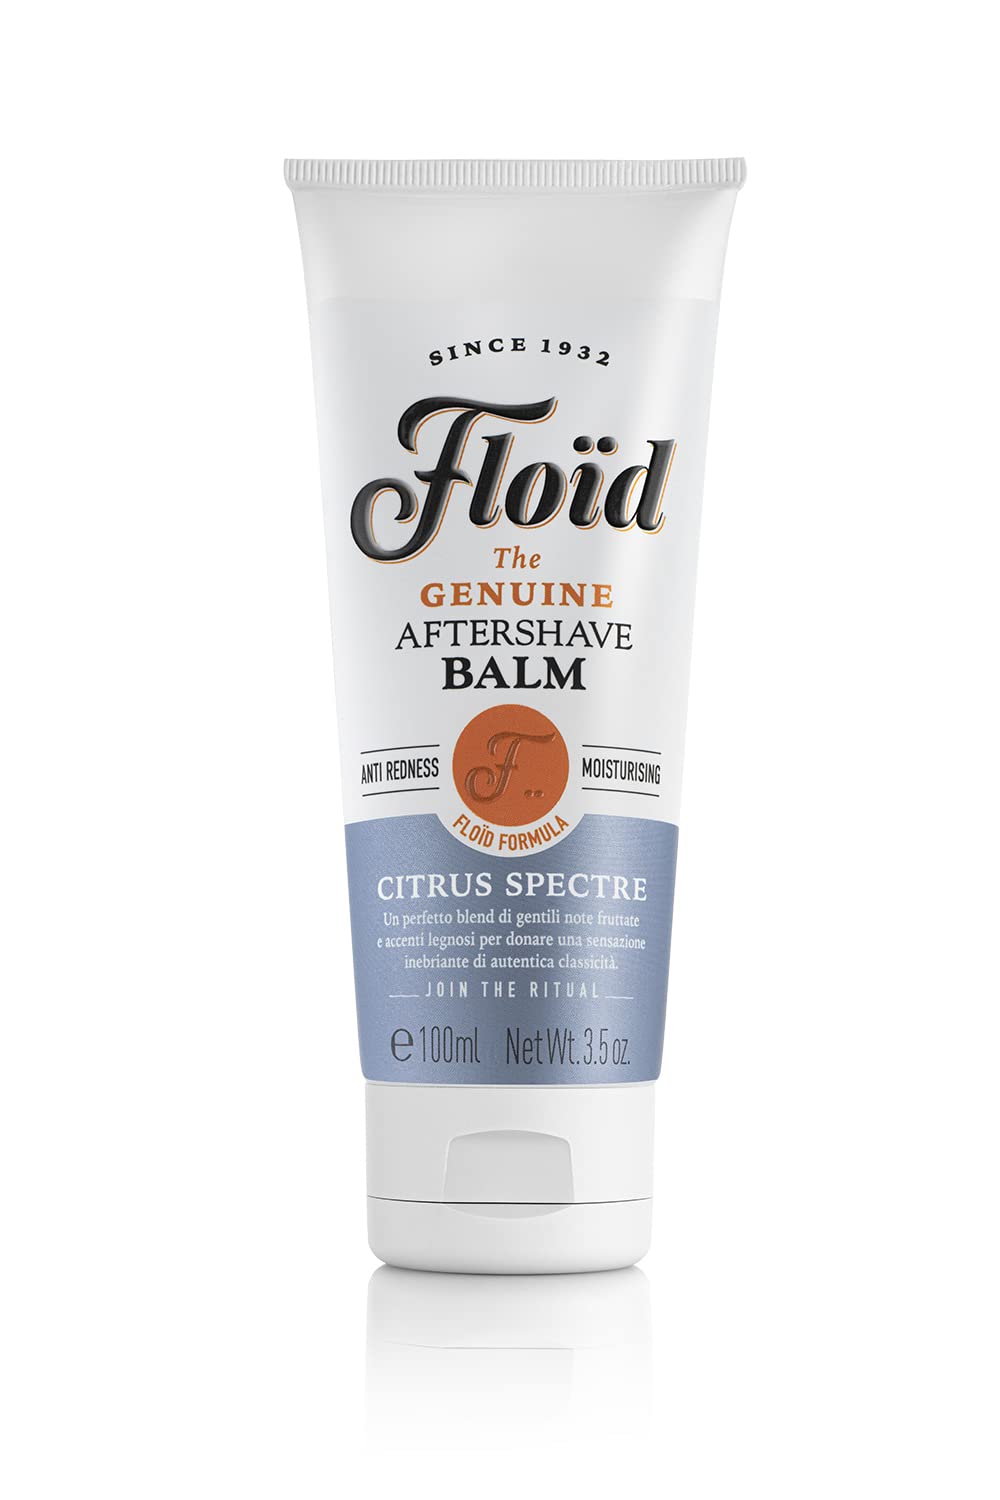 floid Floïd Citrus Spectre Aftershave Balm (100 ml), Soothing after shave balm for men with allantoin, glycerin and aloe juice moisturises, protects and regenerates skin